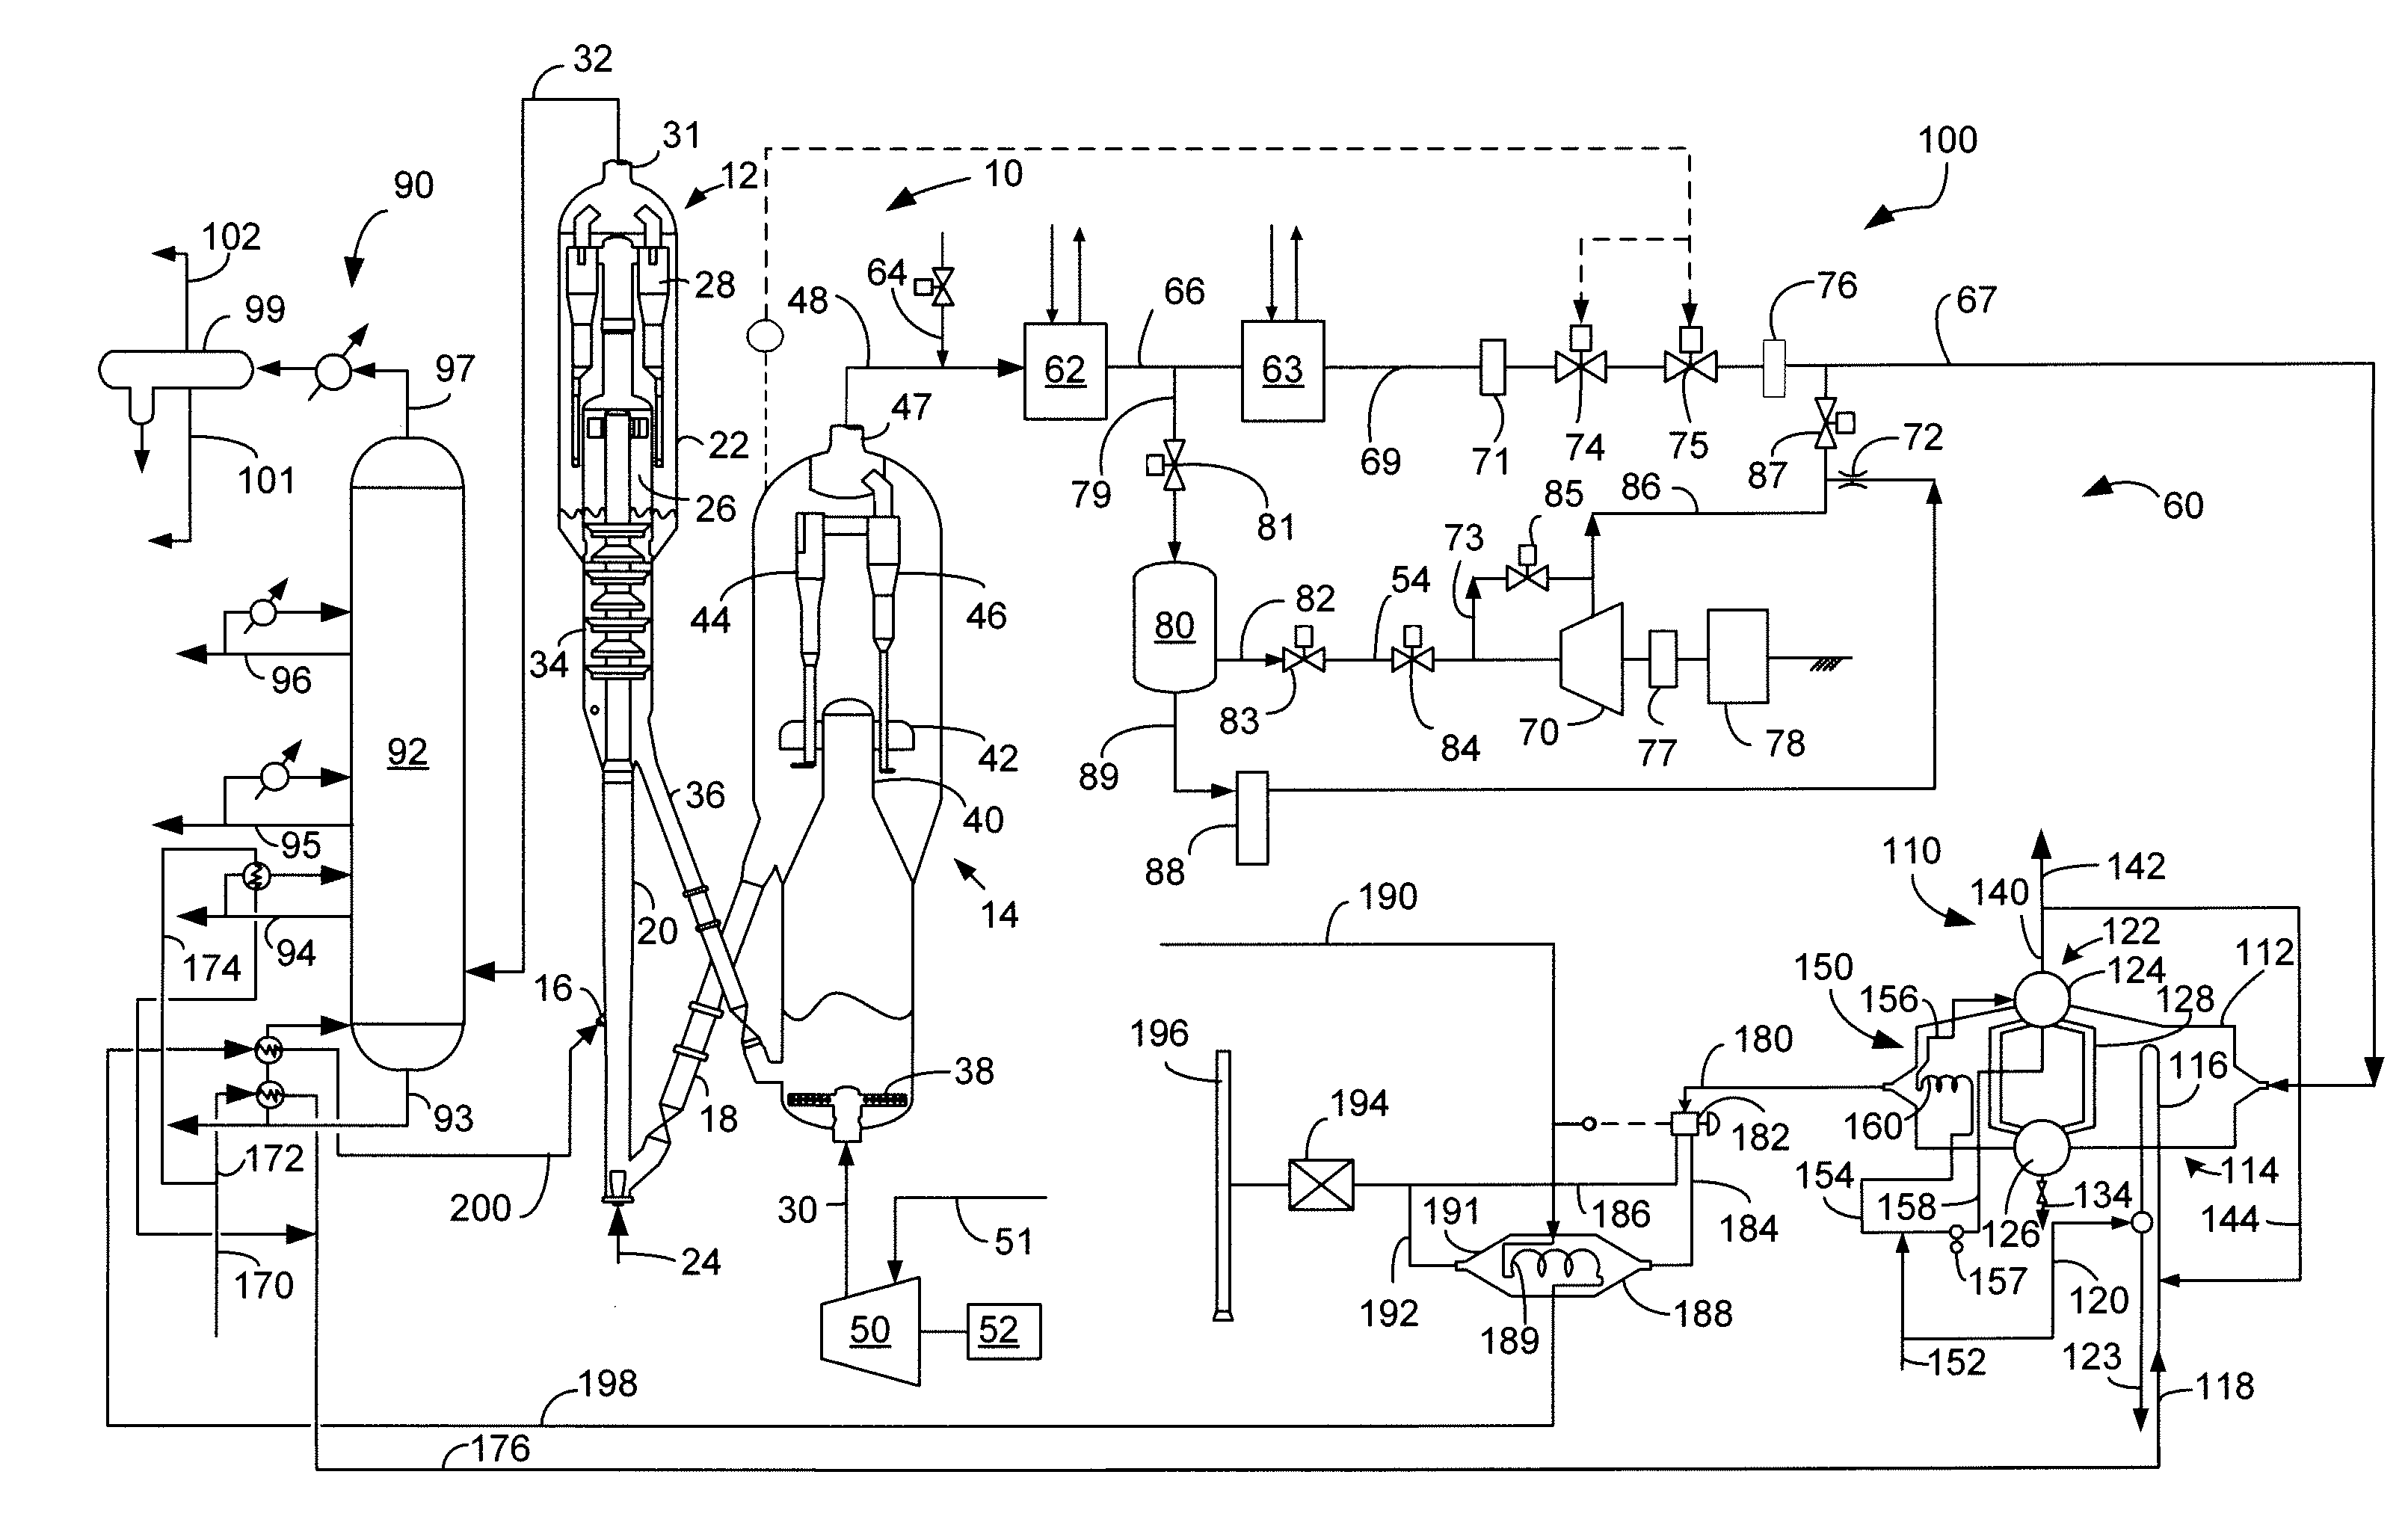 Process for Feed Preheating with Flue Gas Cooler